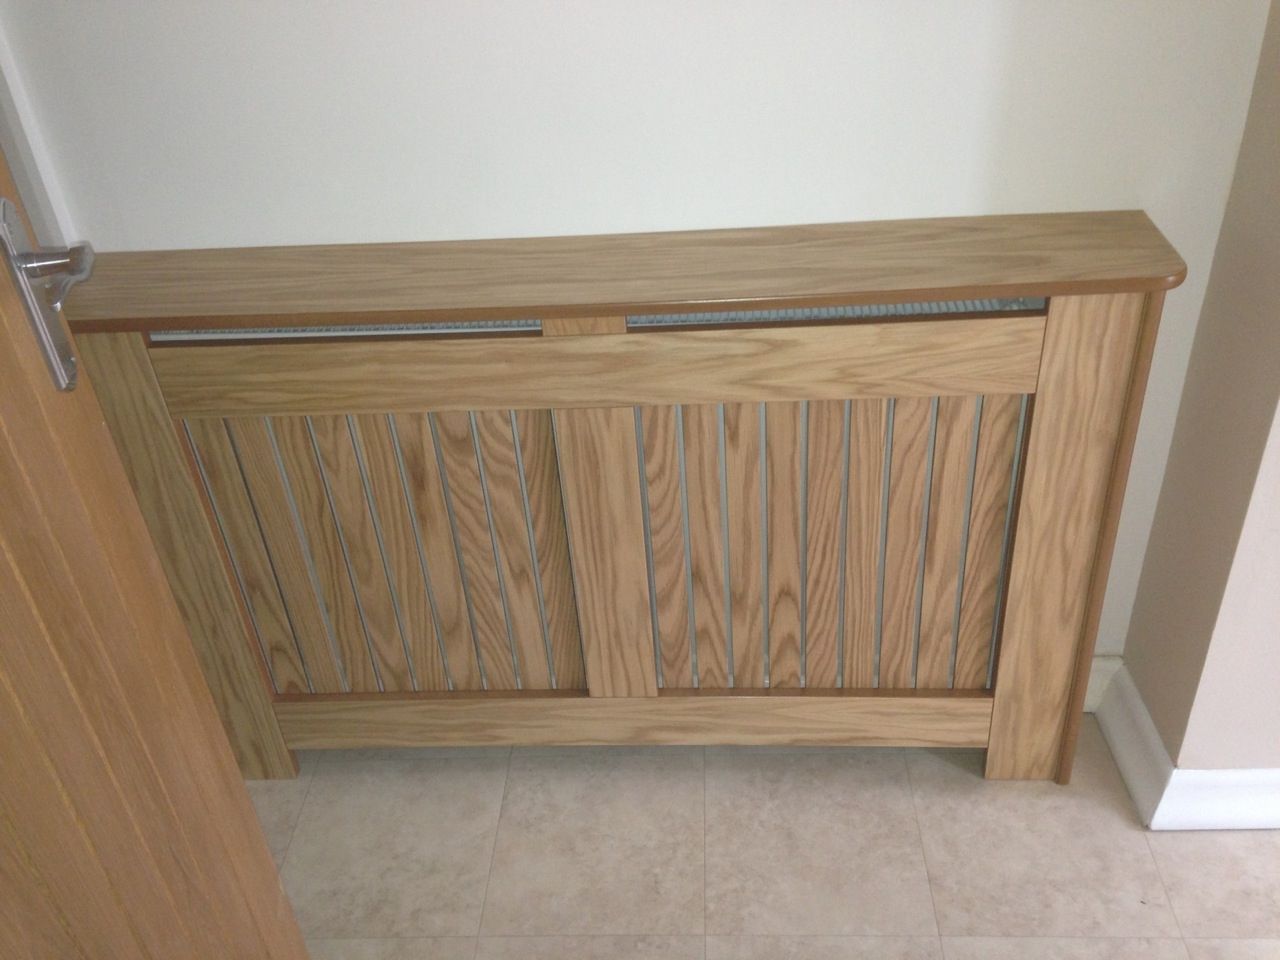 Exquisite Radiator Cover Oak Radiator As Wells As Radiator Cover For Preferred Radiator Cupboards (View 14 of 15)